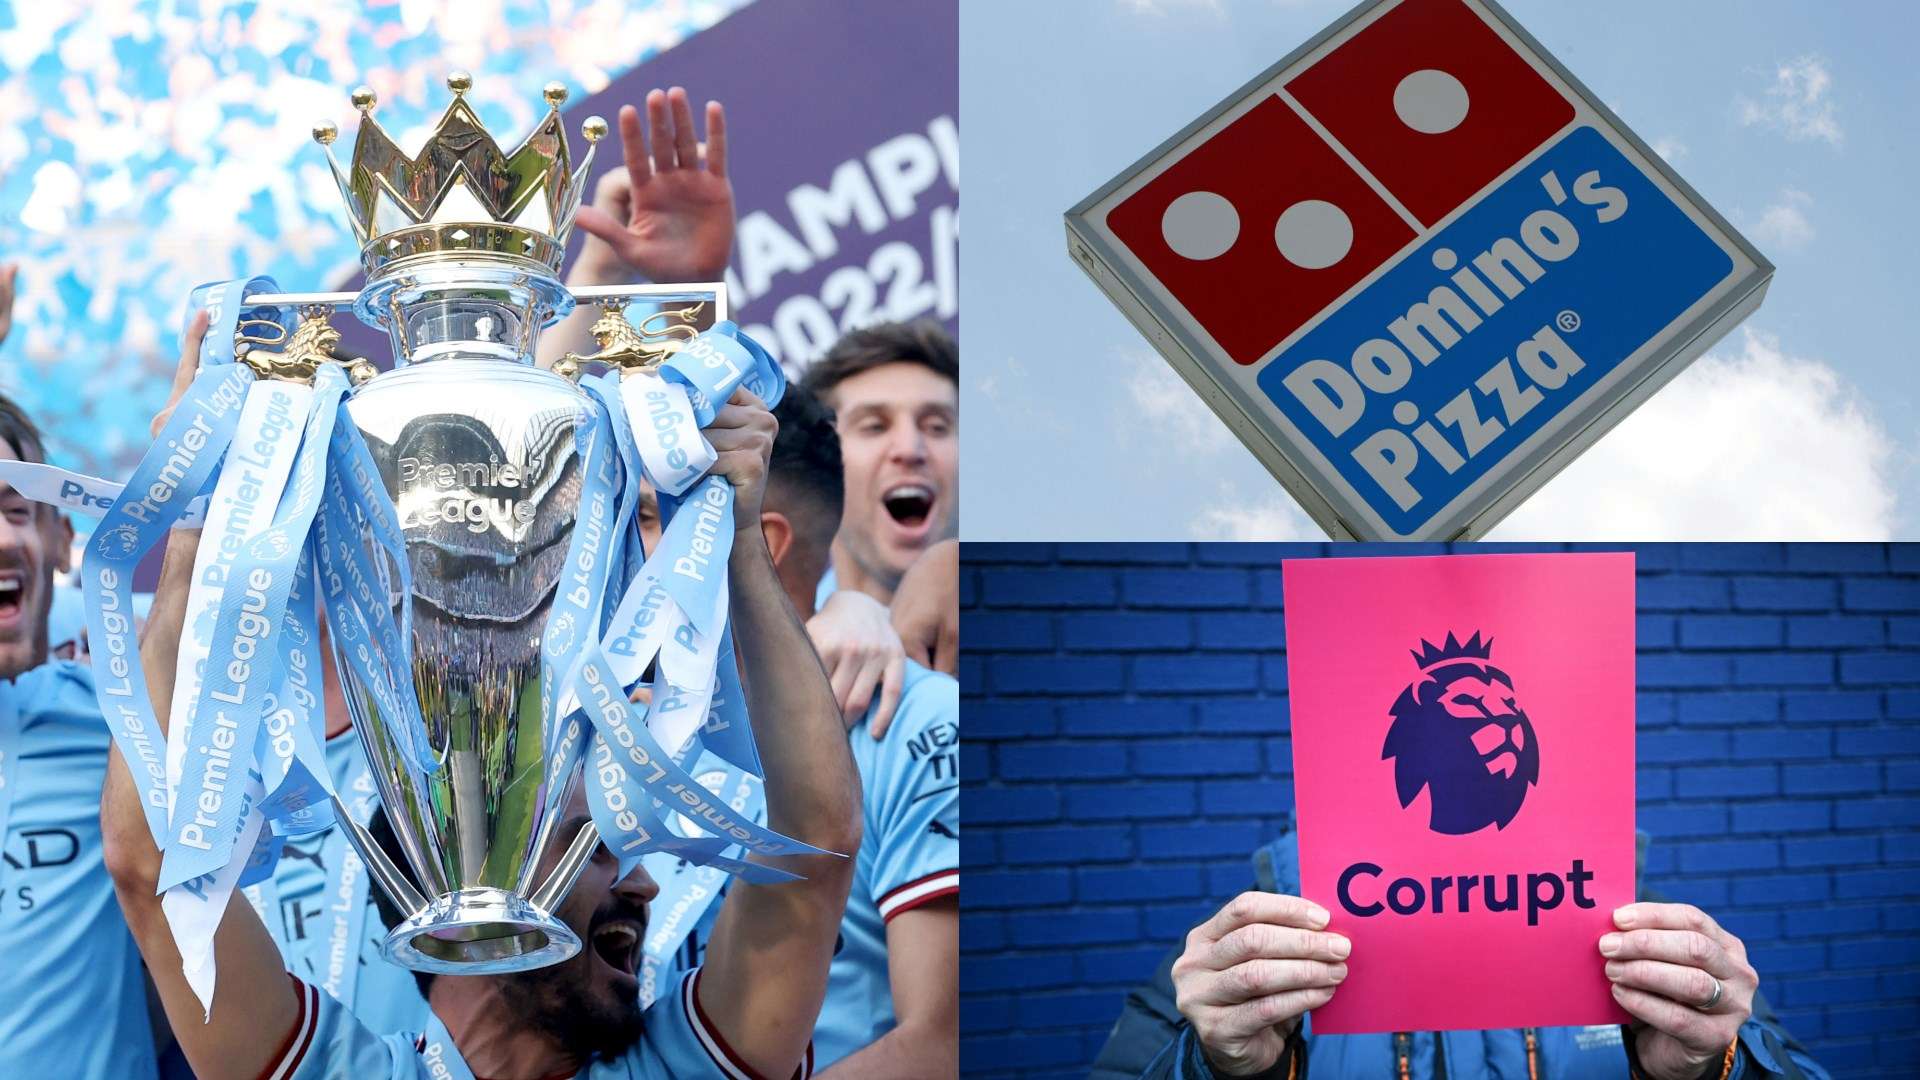 Manchester City trolled by Dominos split